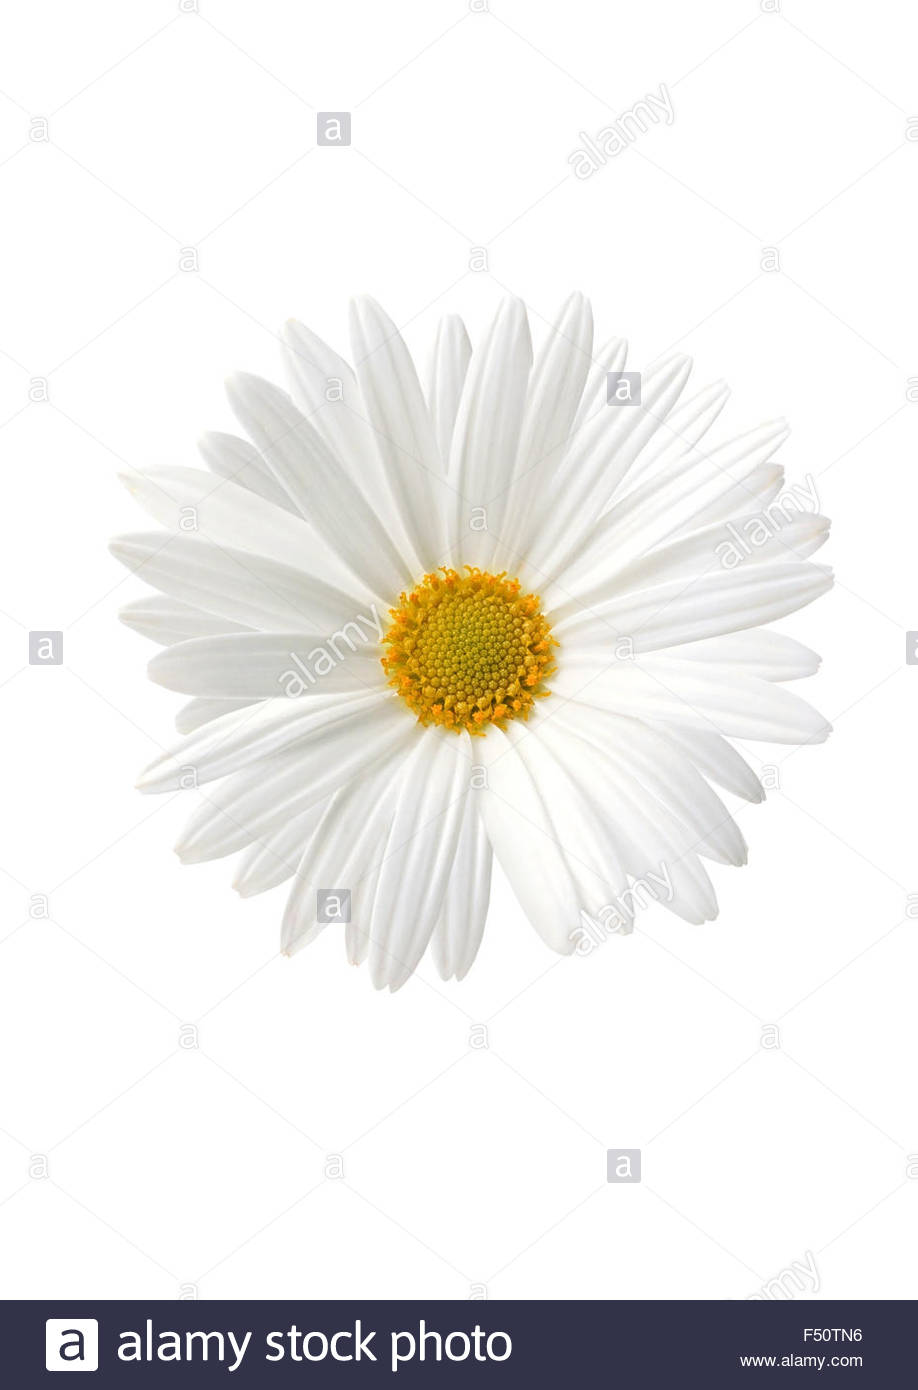 White Sunflower Floral On Background Stock Photo